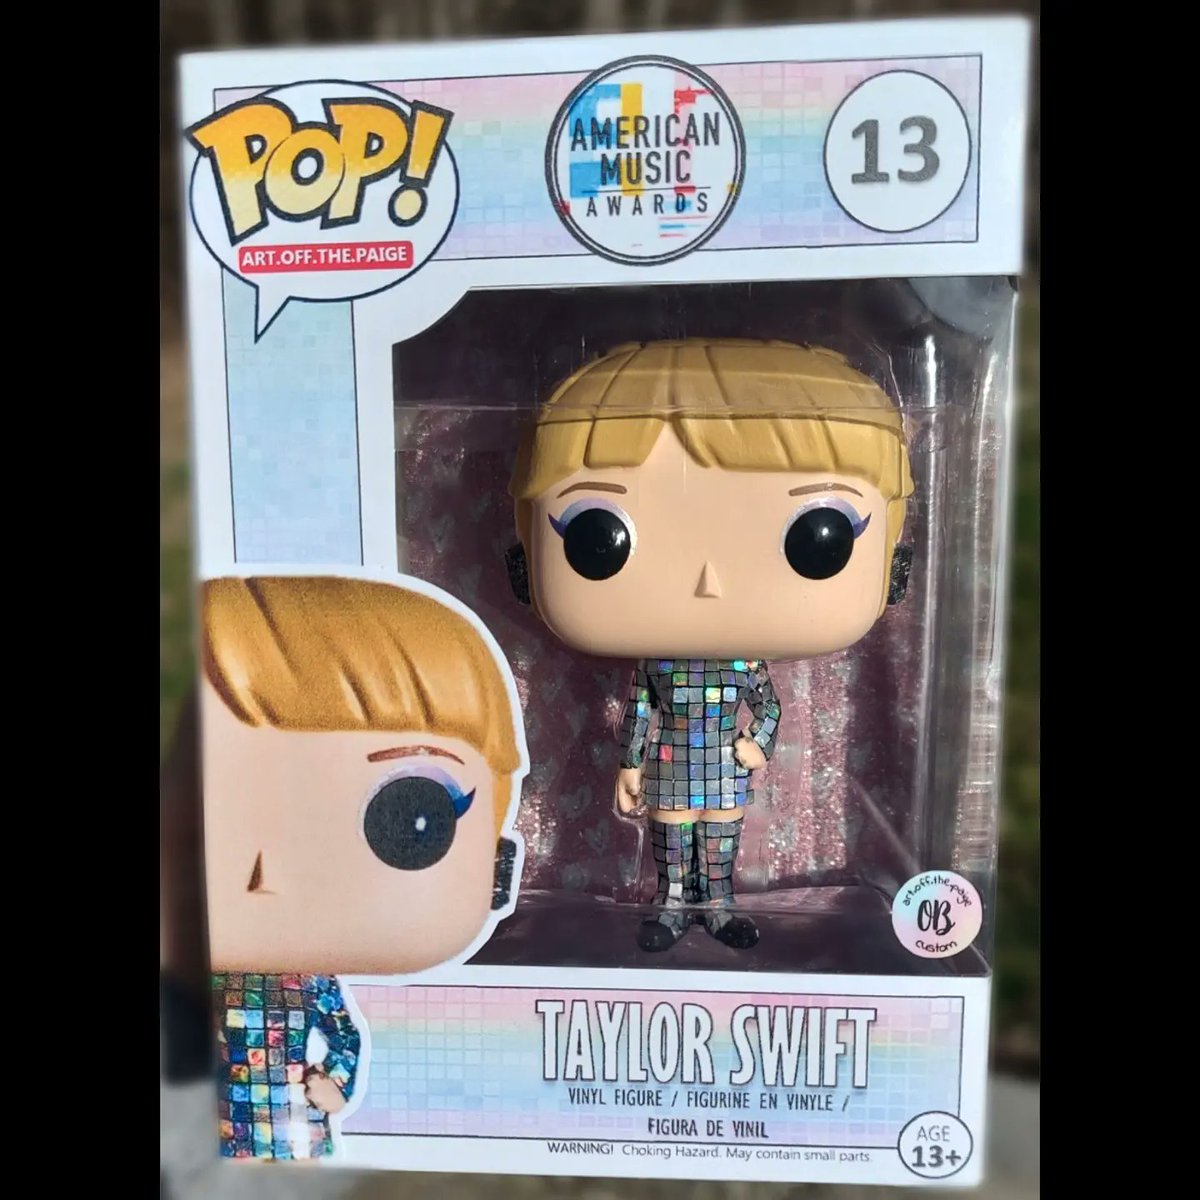 Pin by not_sy11 on Funko pops for my room  Taylor swift birthday party  ideas, Taylor swift, Pop dolls